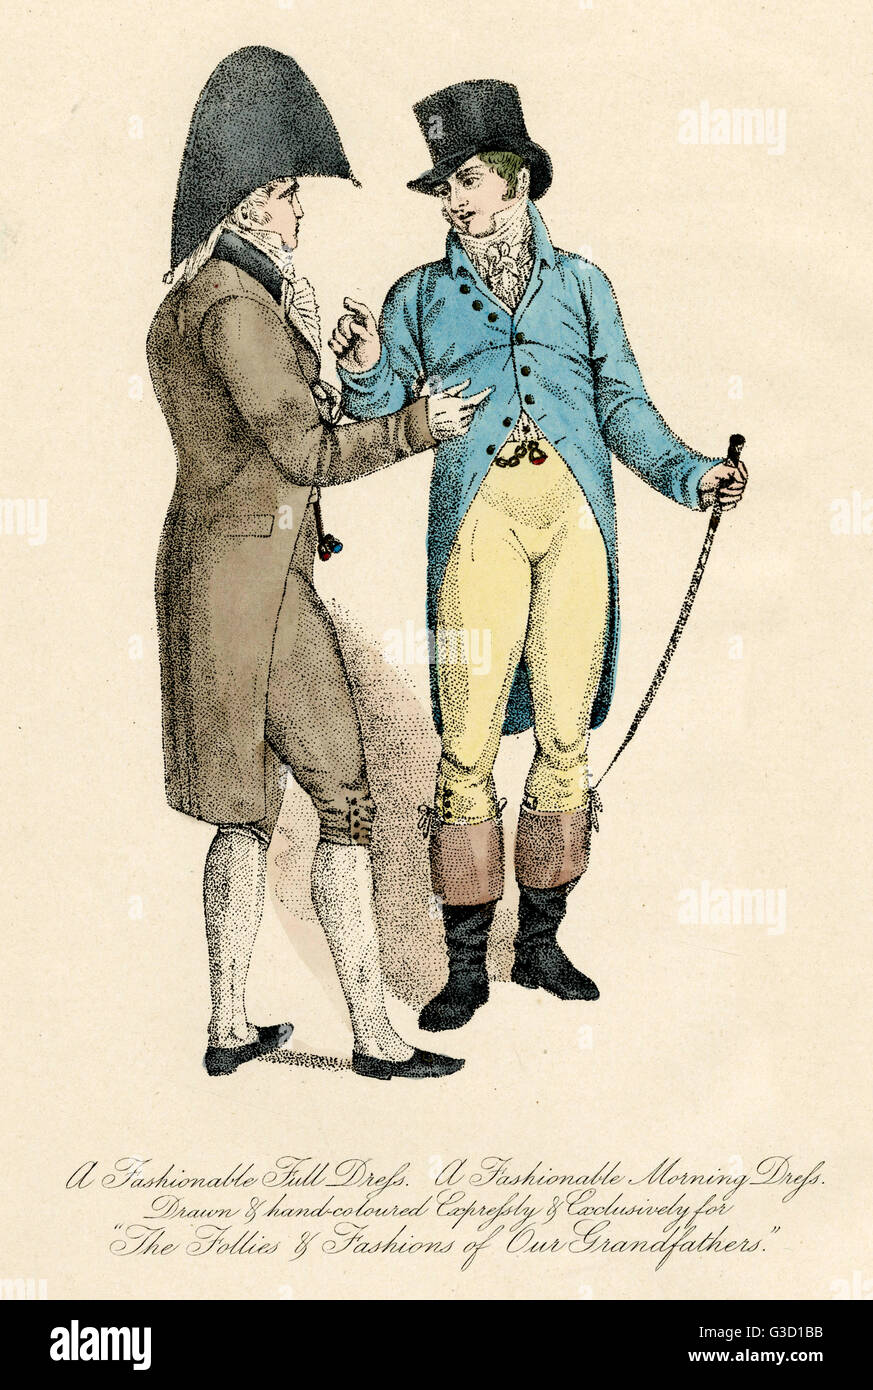 Fashionable morning dress for a gentlemen. Date: 1807 Stock Photo - Alamy